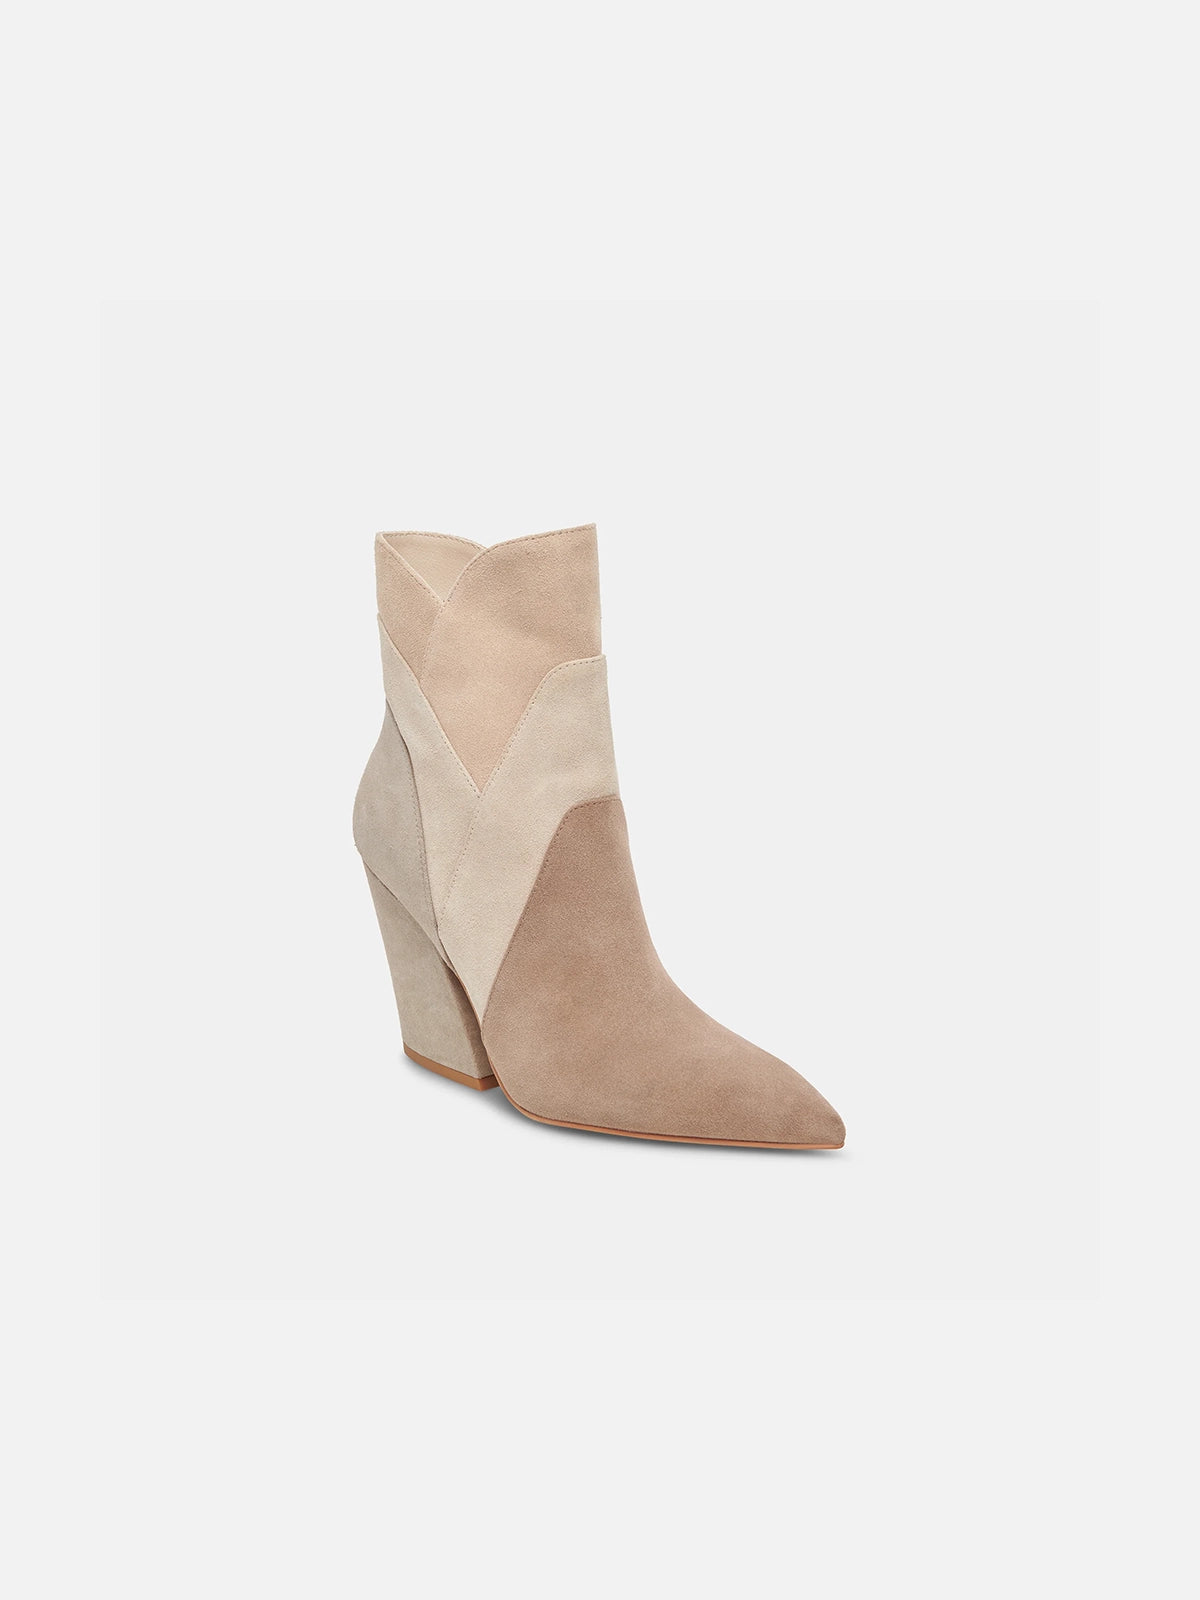 dolce vita neena booties in taupe multi suede